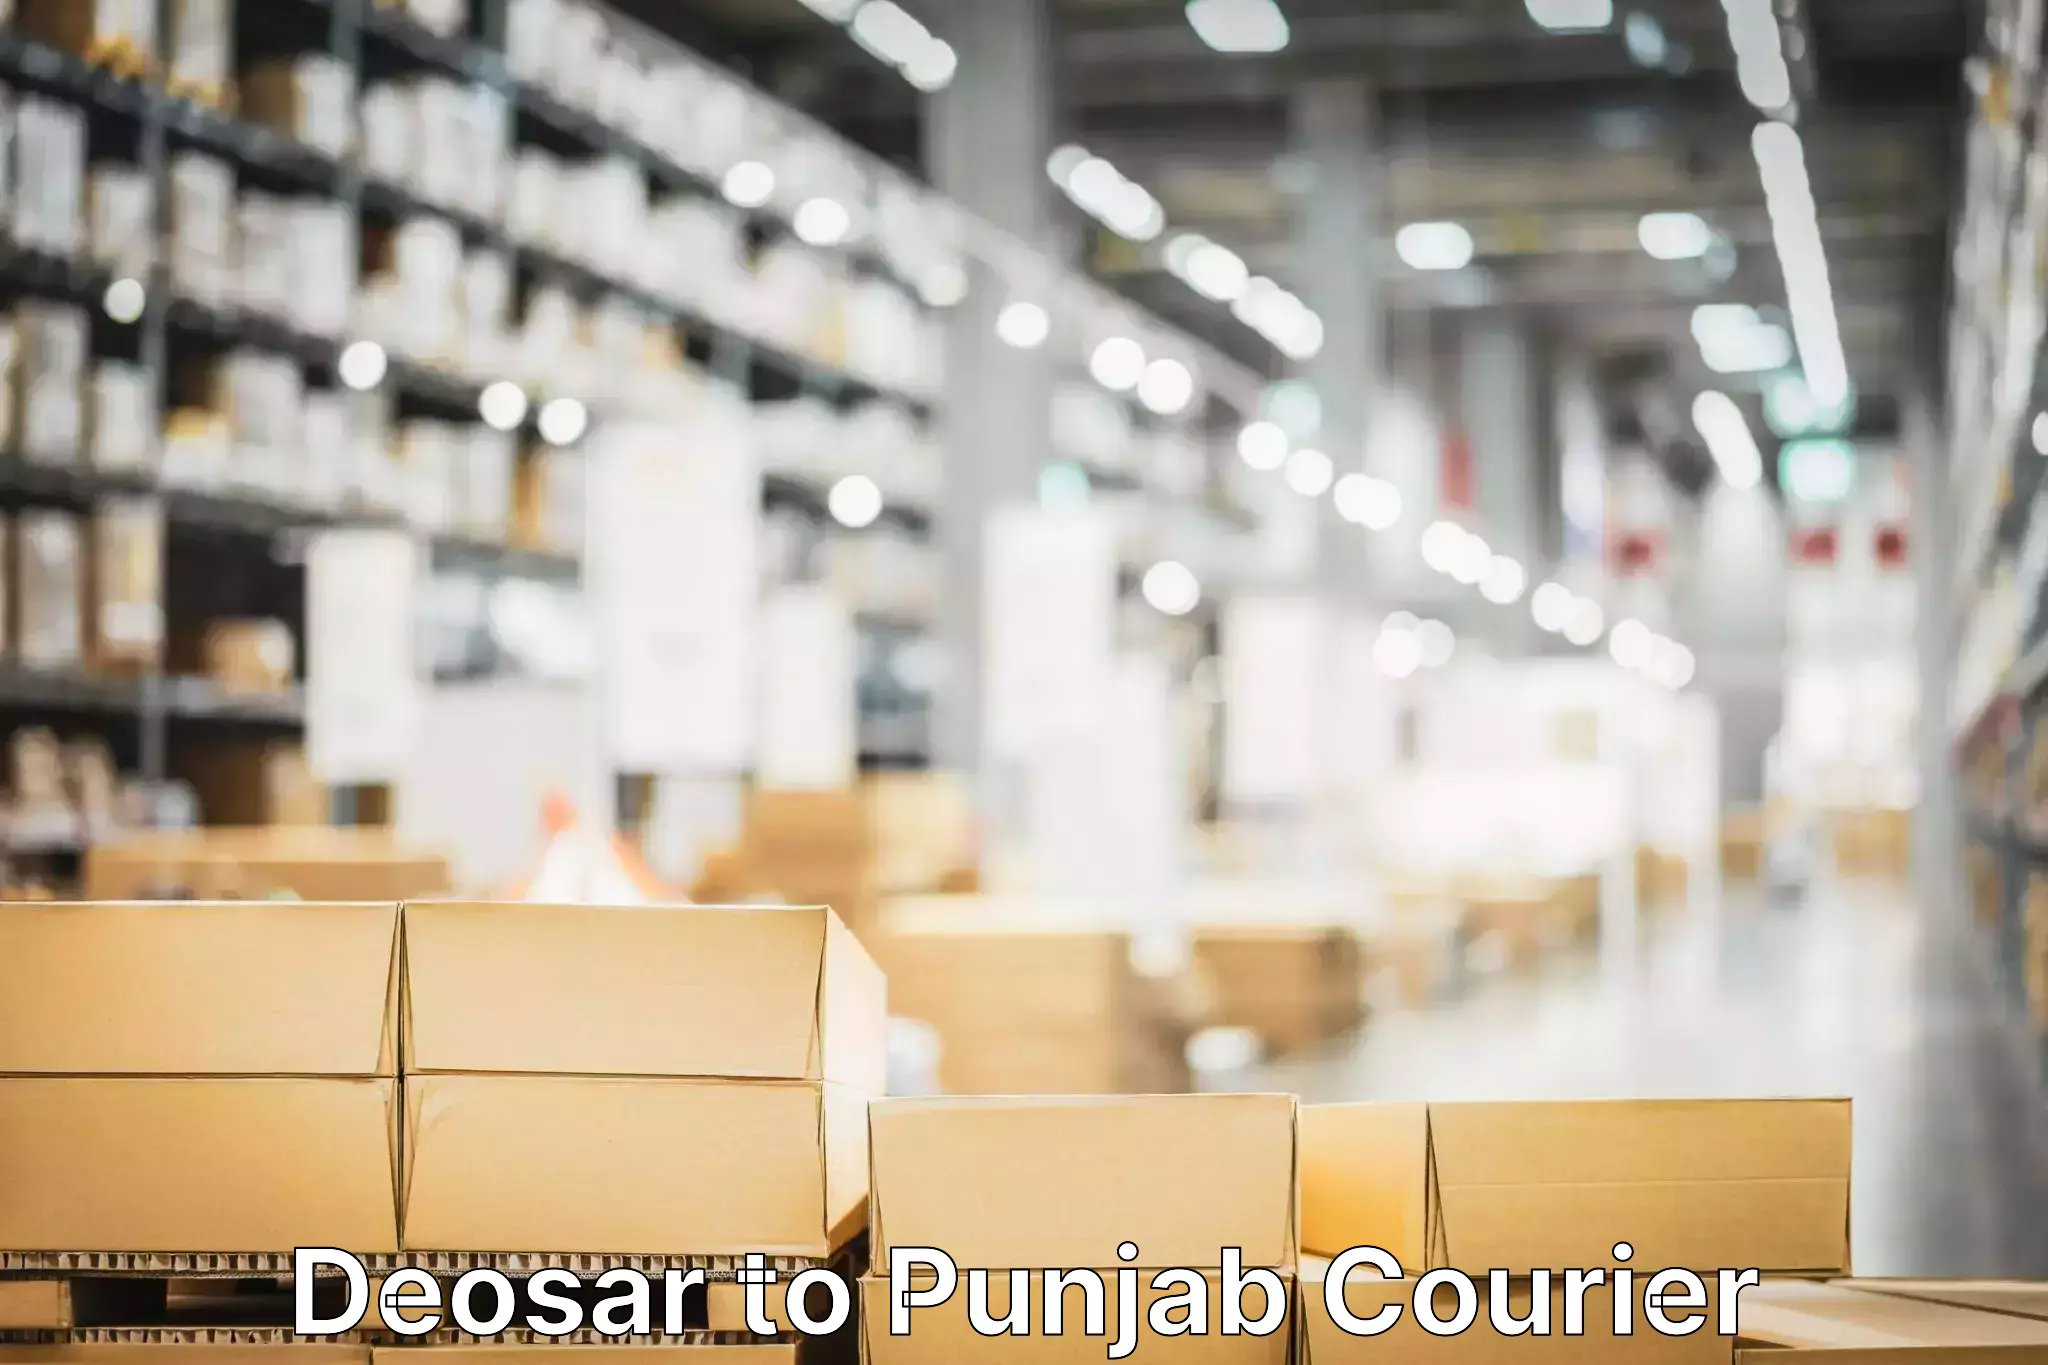 Nationwide shipping coverage Deosar to Punjab